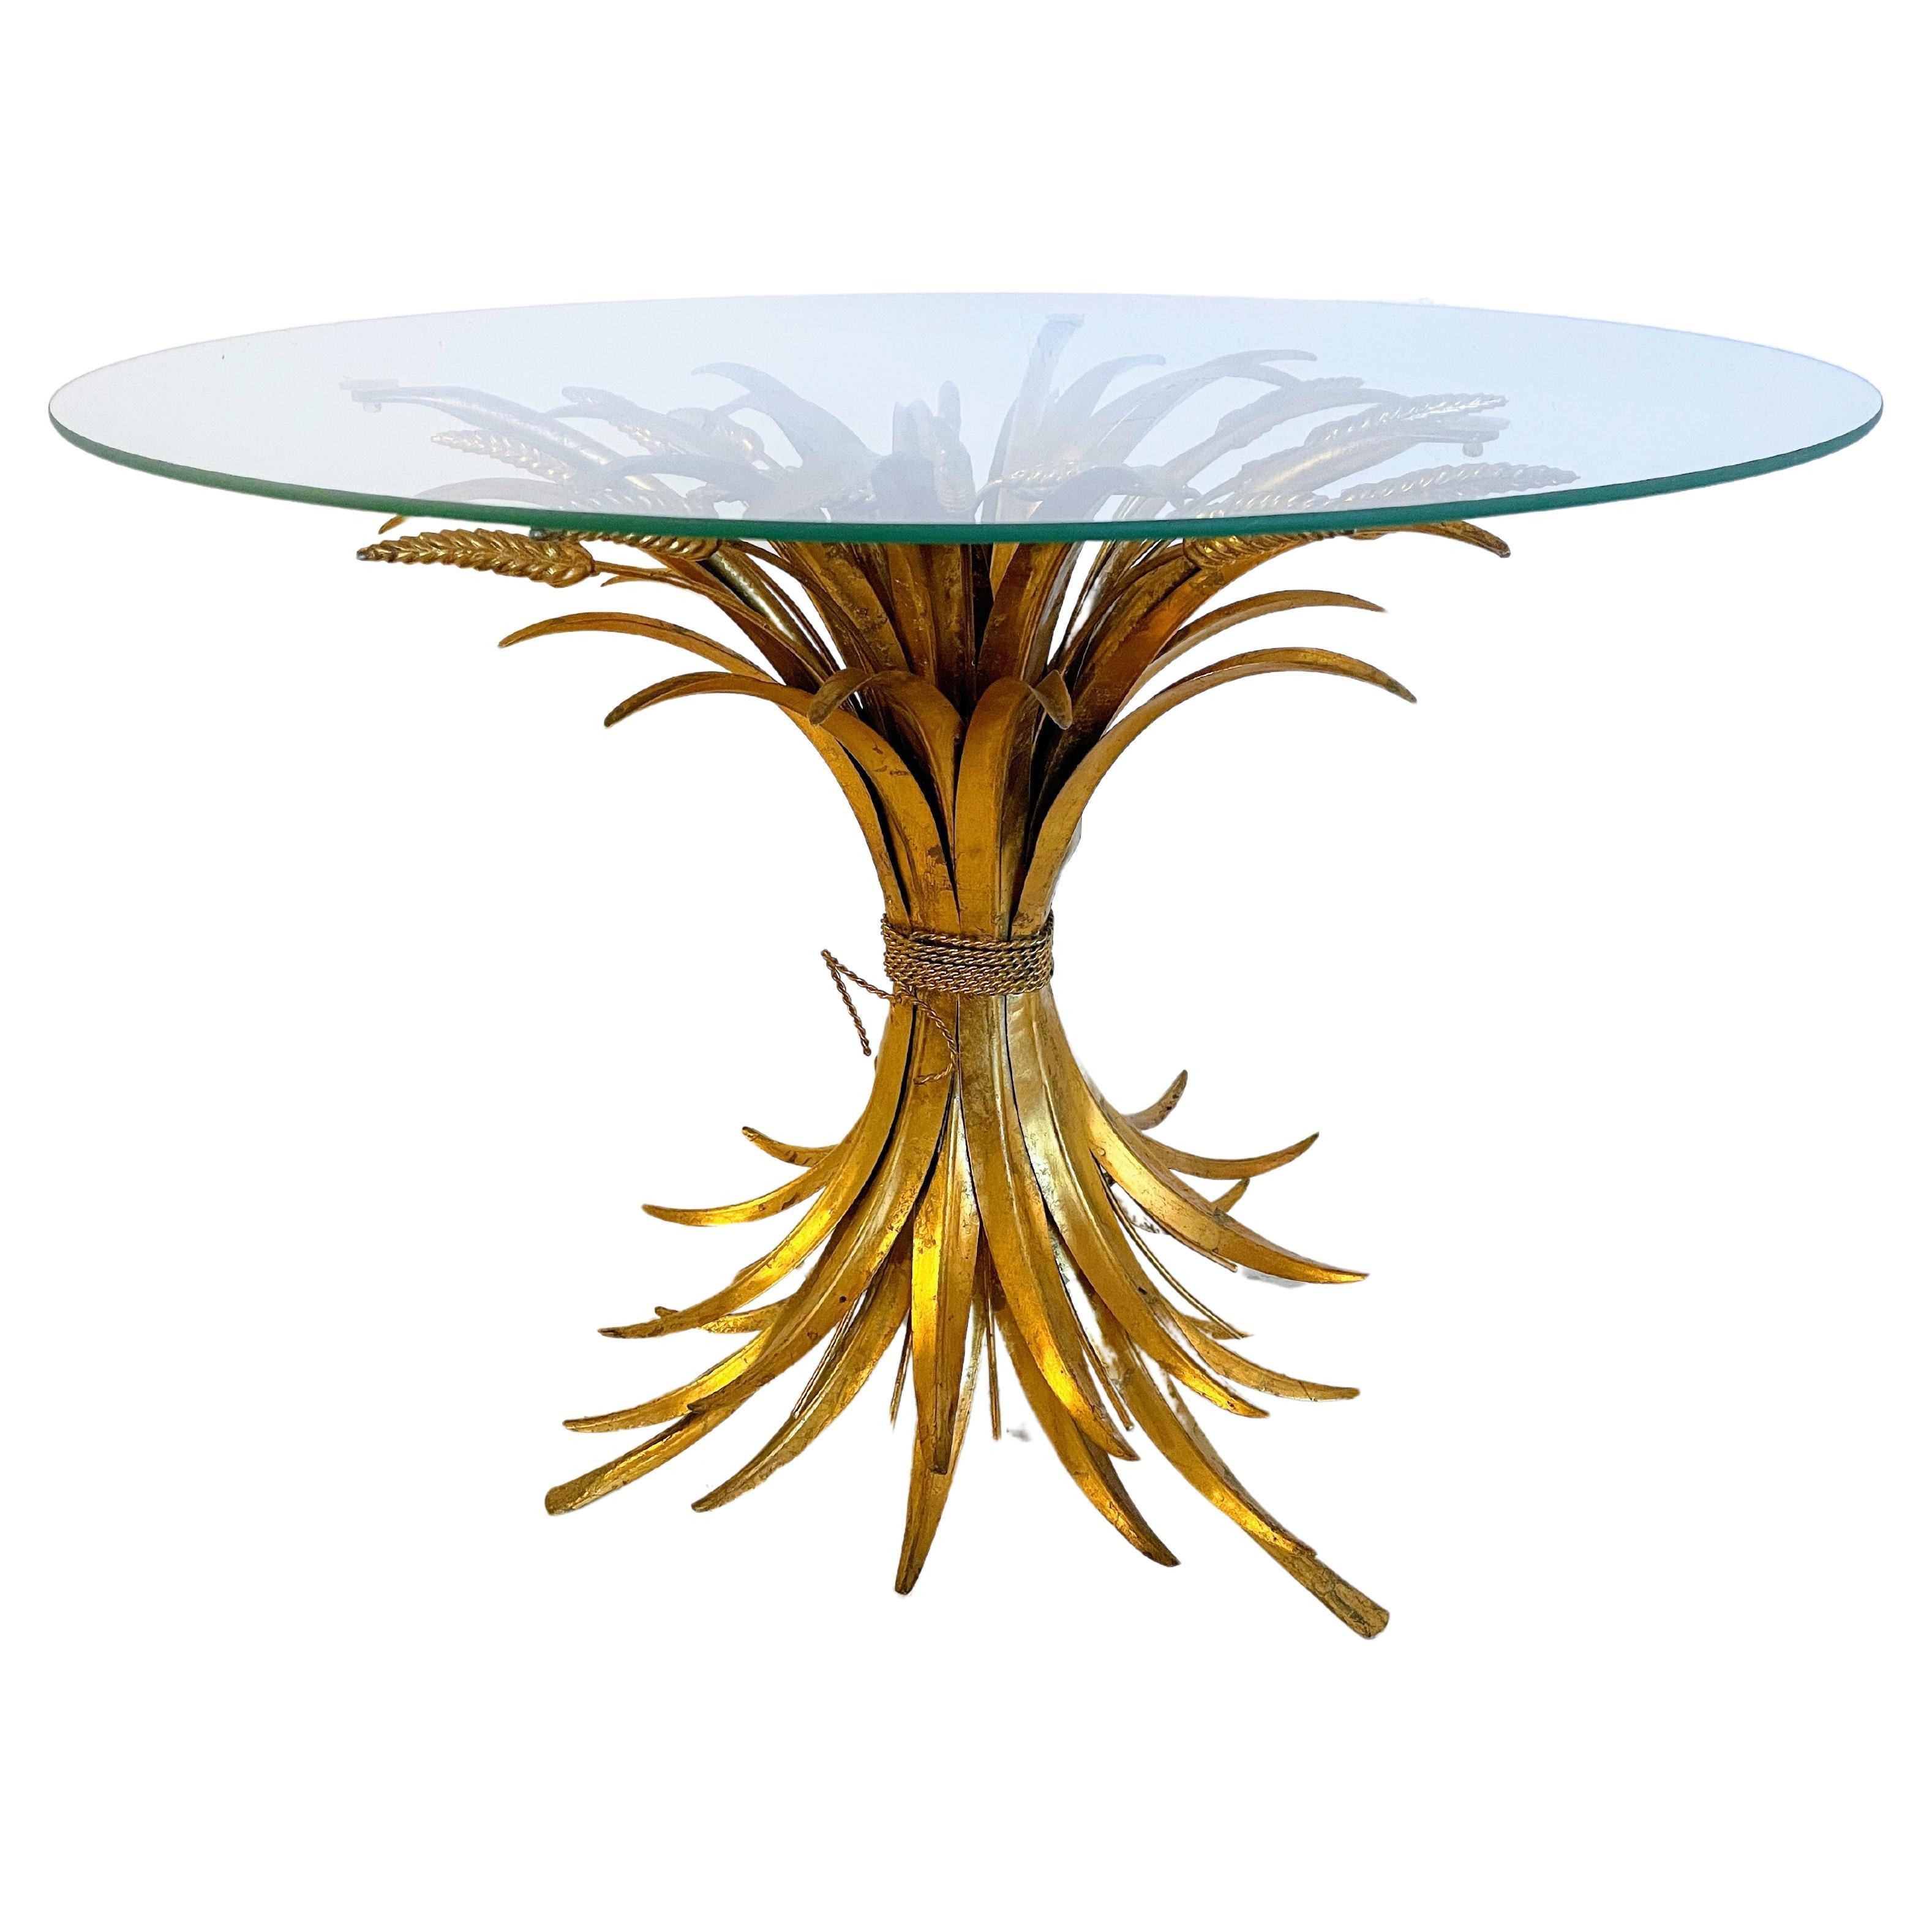 Gilded Hollywood Regency Ears of Wheat Coffee Table in Coco Chanel Style, 1960s